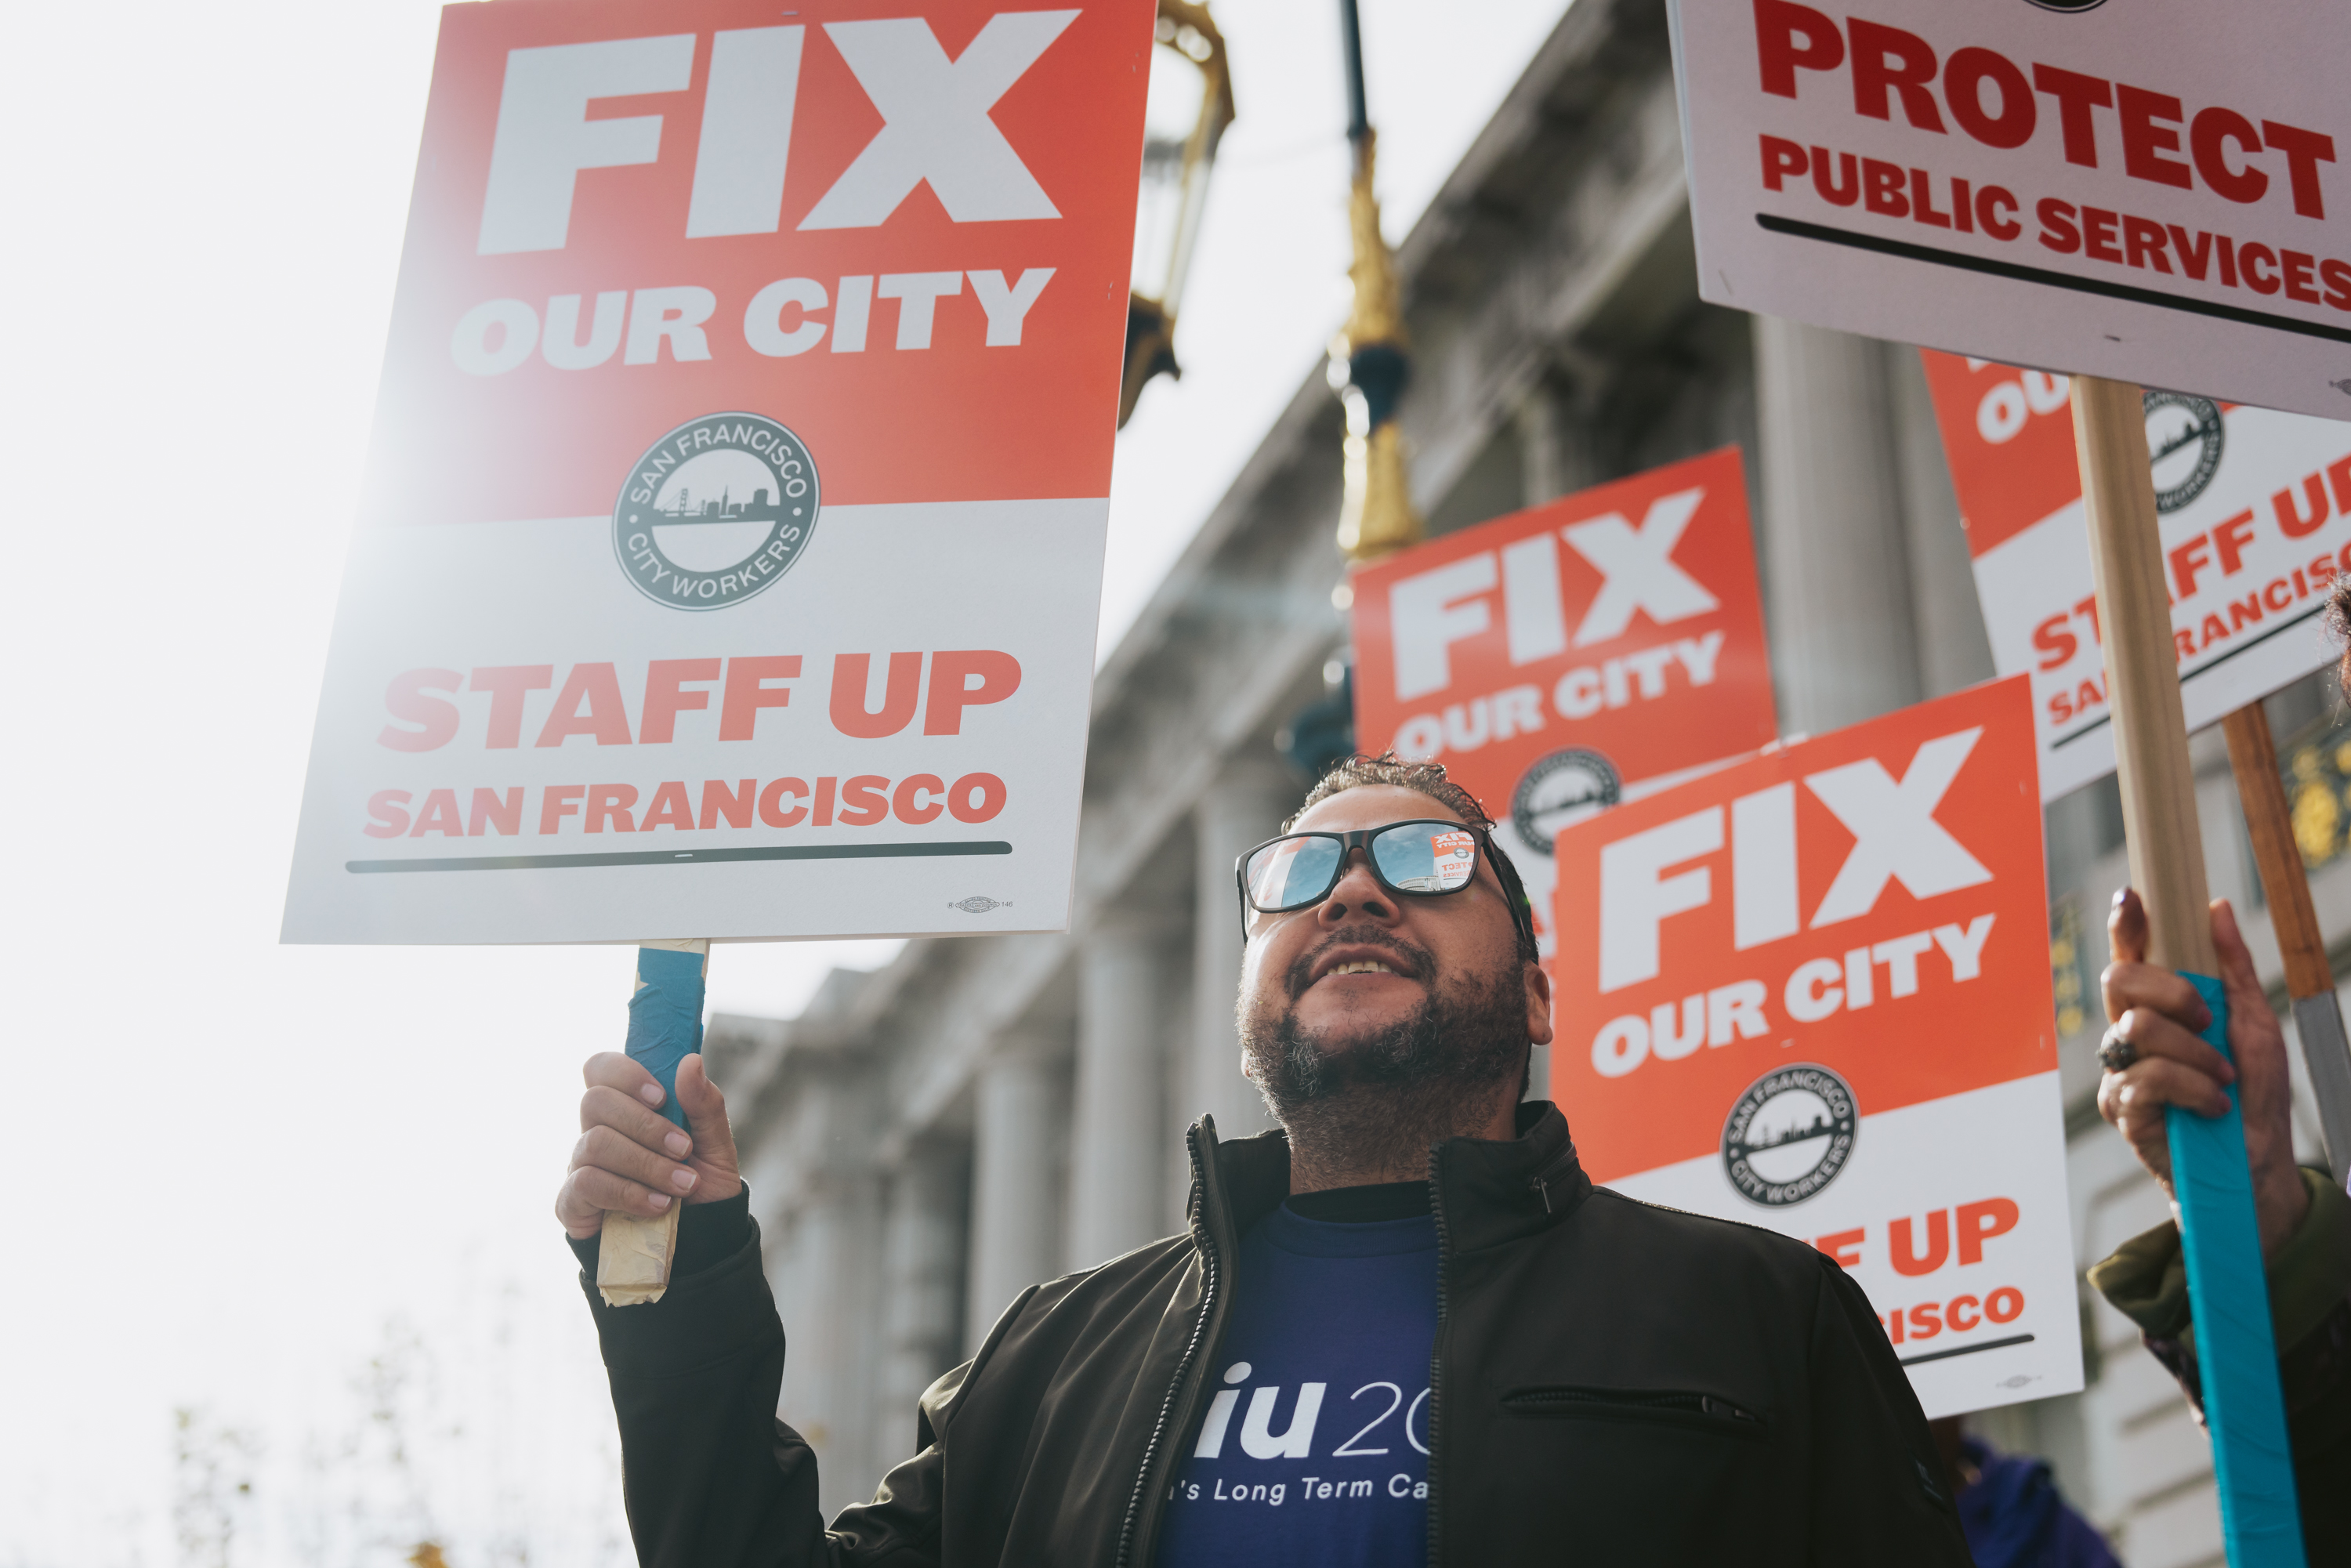 A person in sunglasses at a rally, holding signs that say &quot;FIX OUR CITY&quot; and &quot;STAFF UP SAN FRANCISCO.&quot;